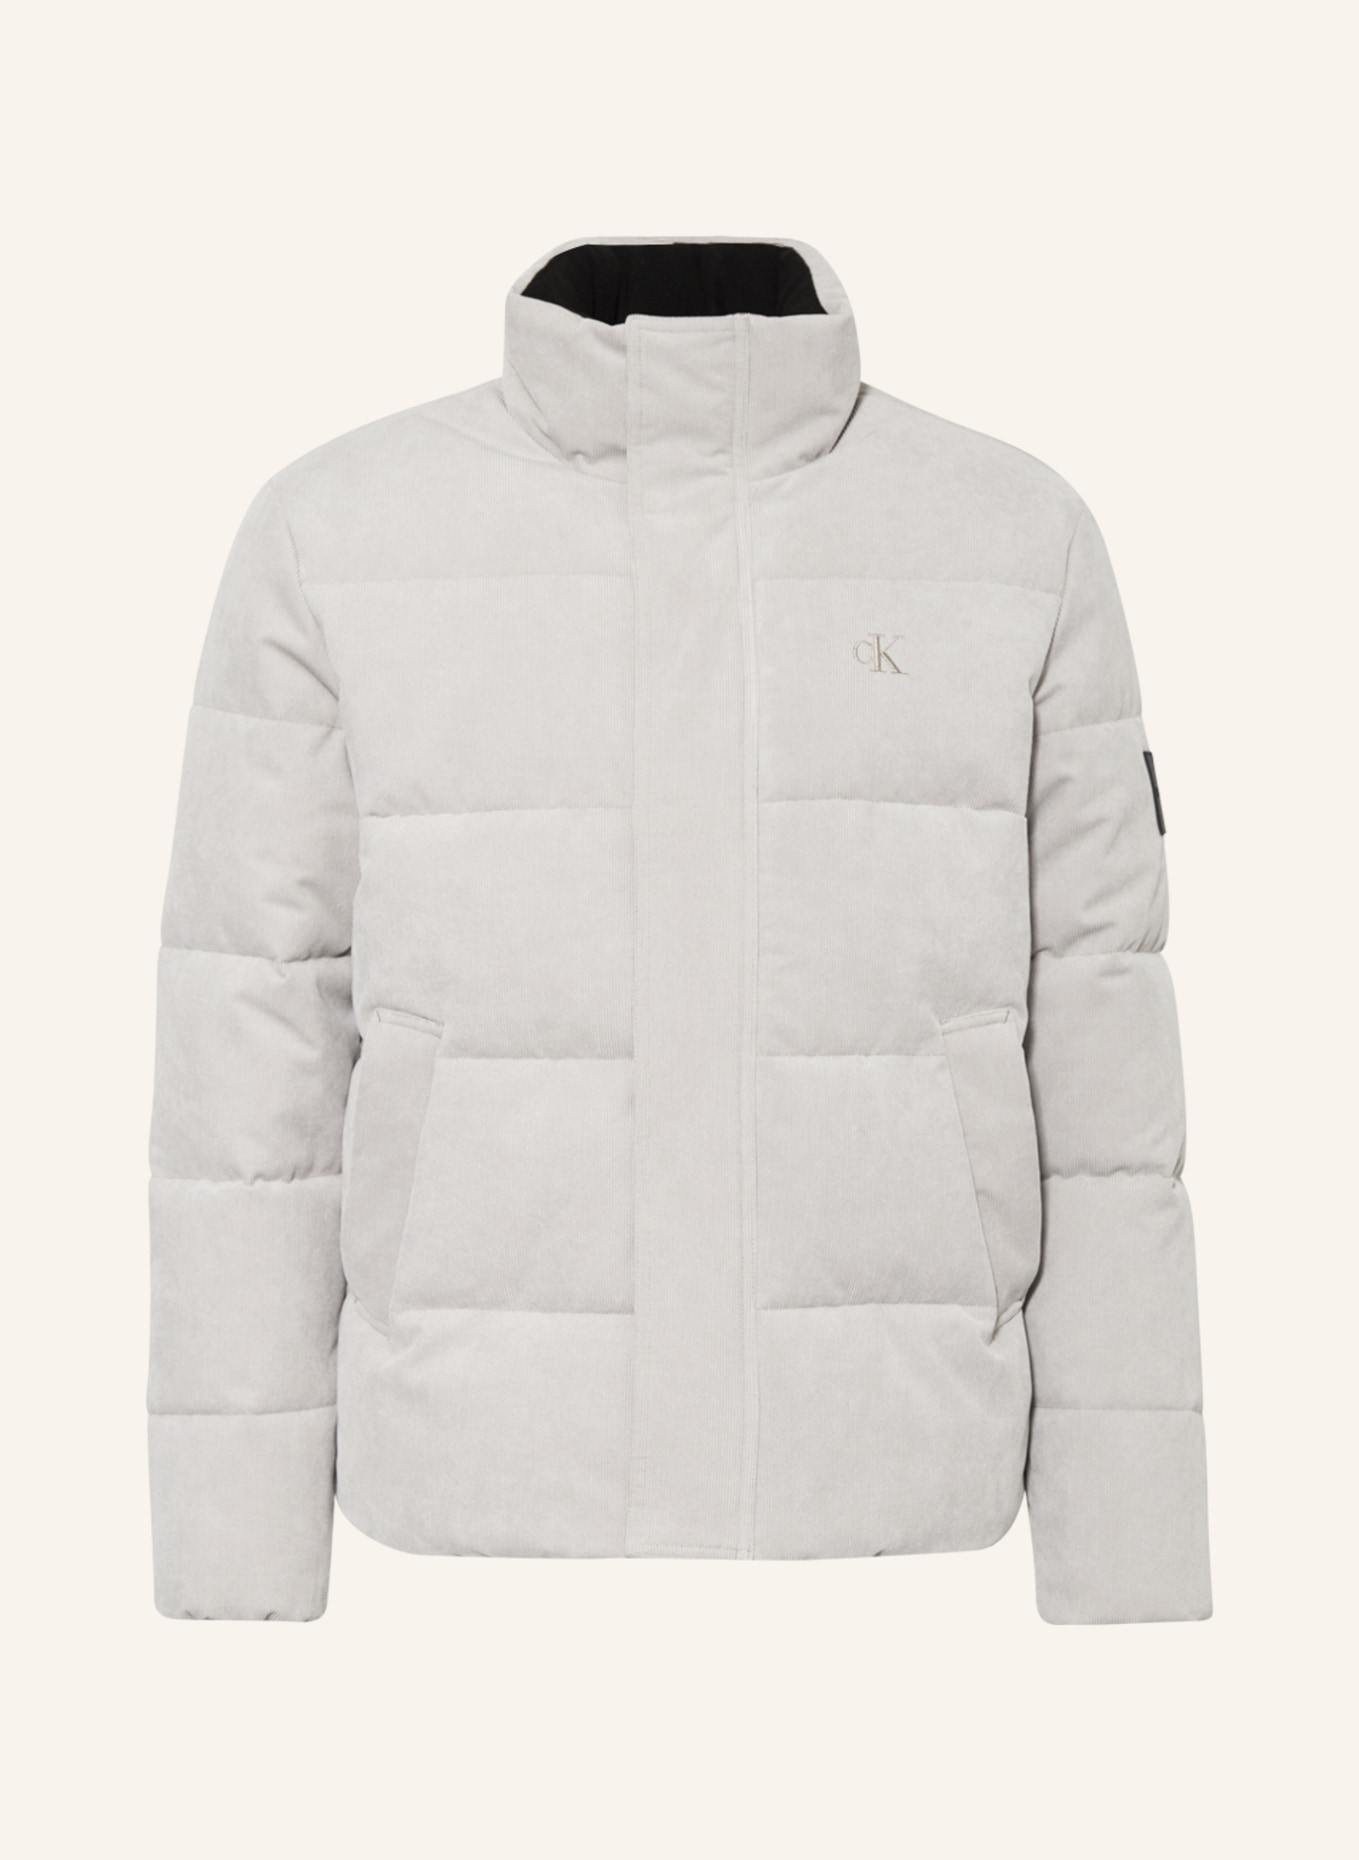 Calvin Klein Jeans Quilted jacket made of corduroy in light gray | Übergangsjacken